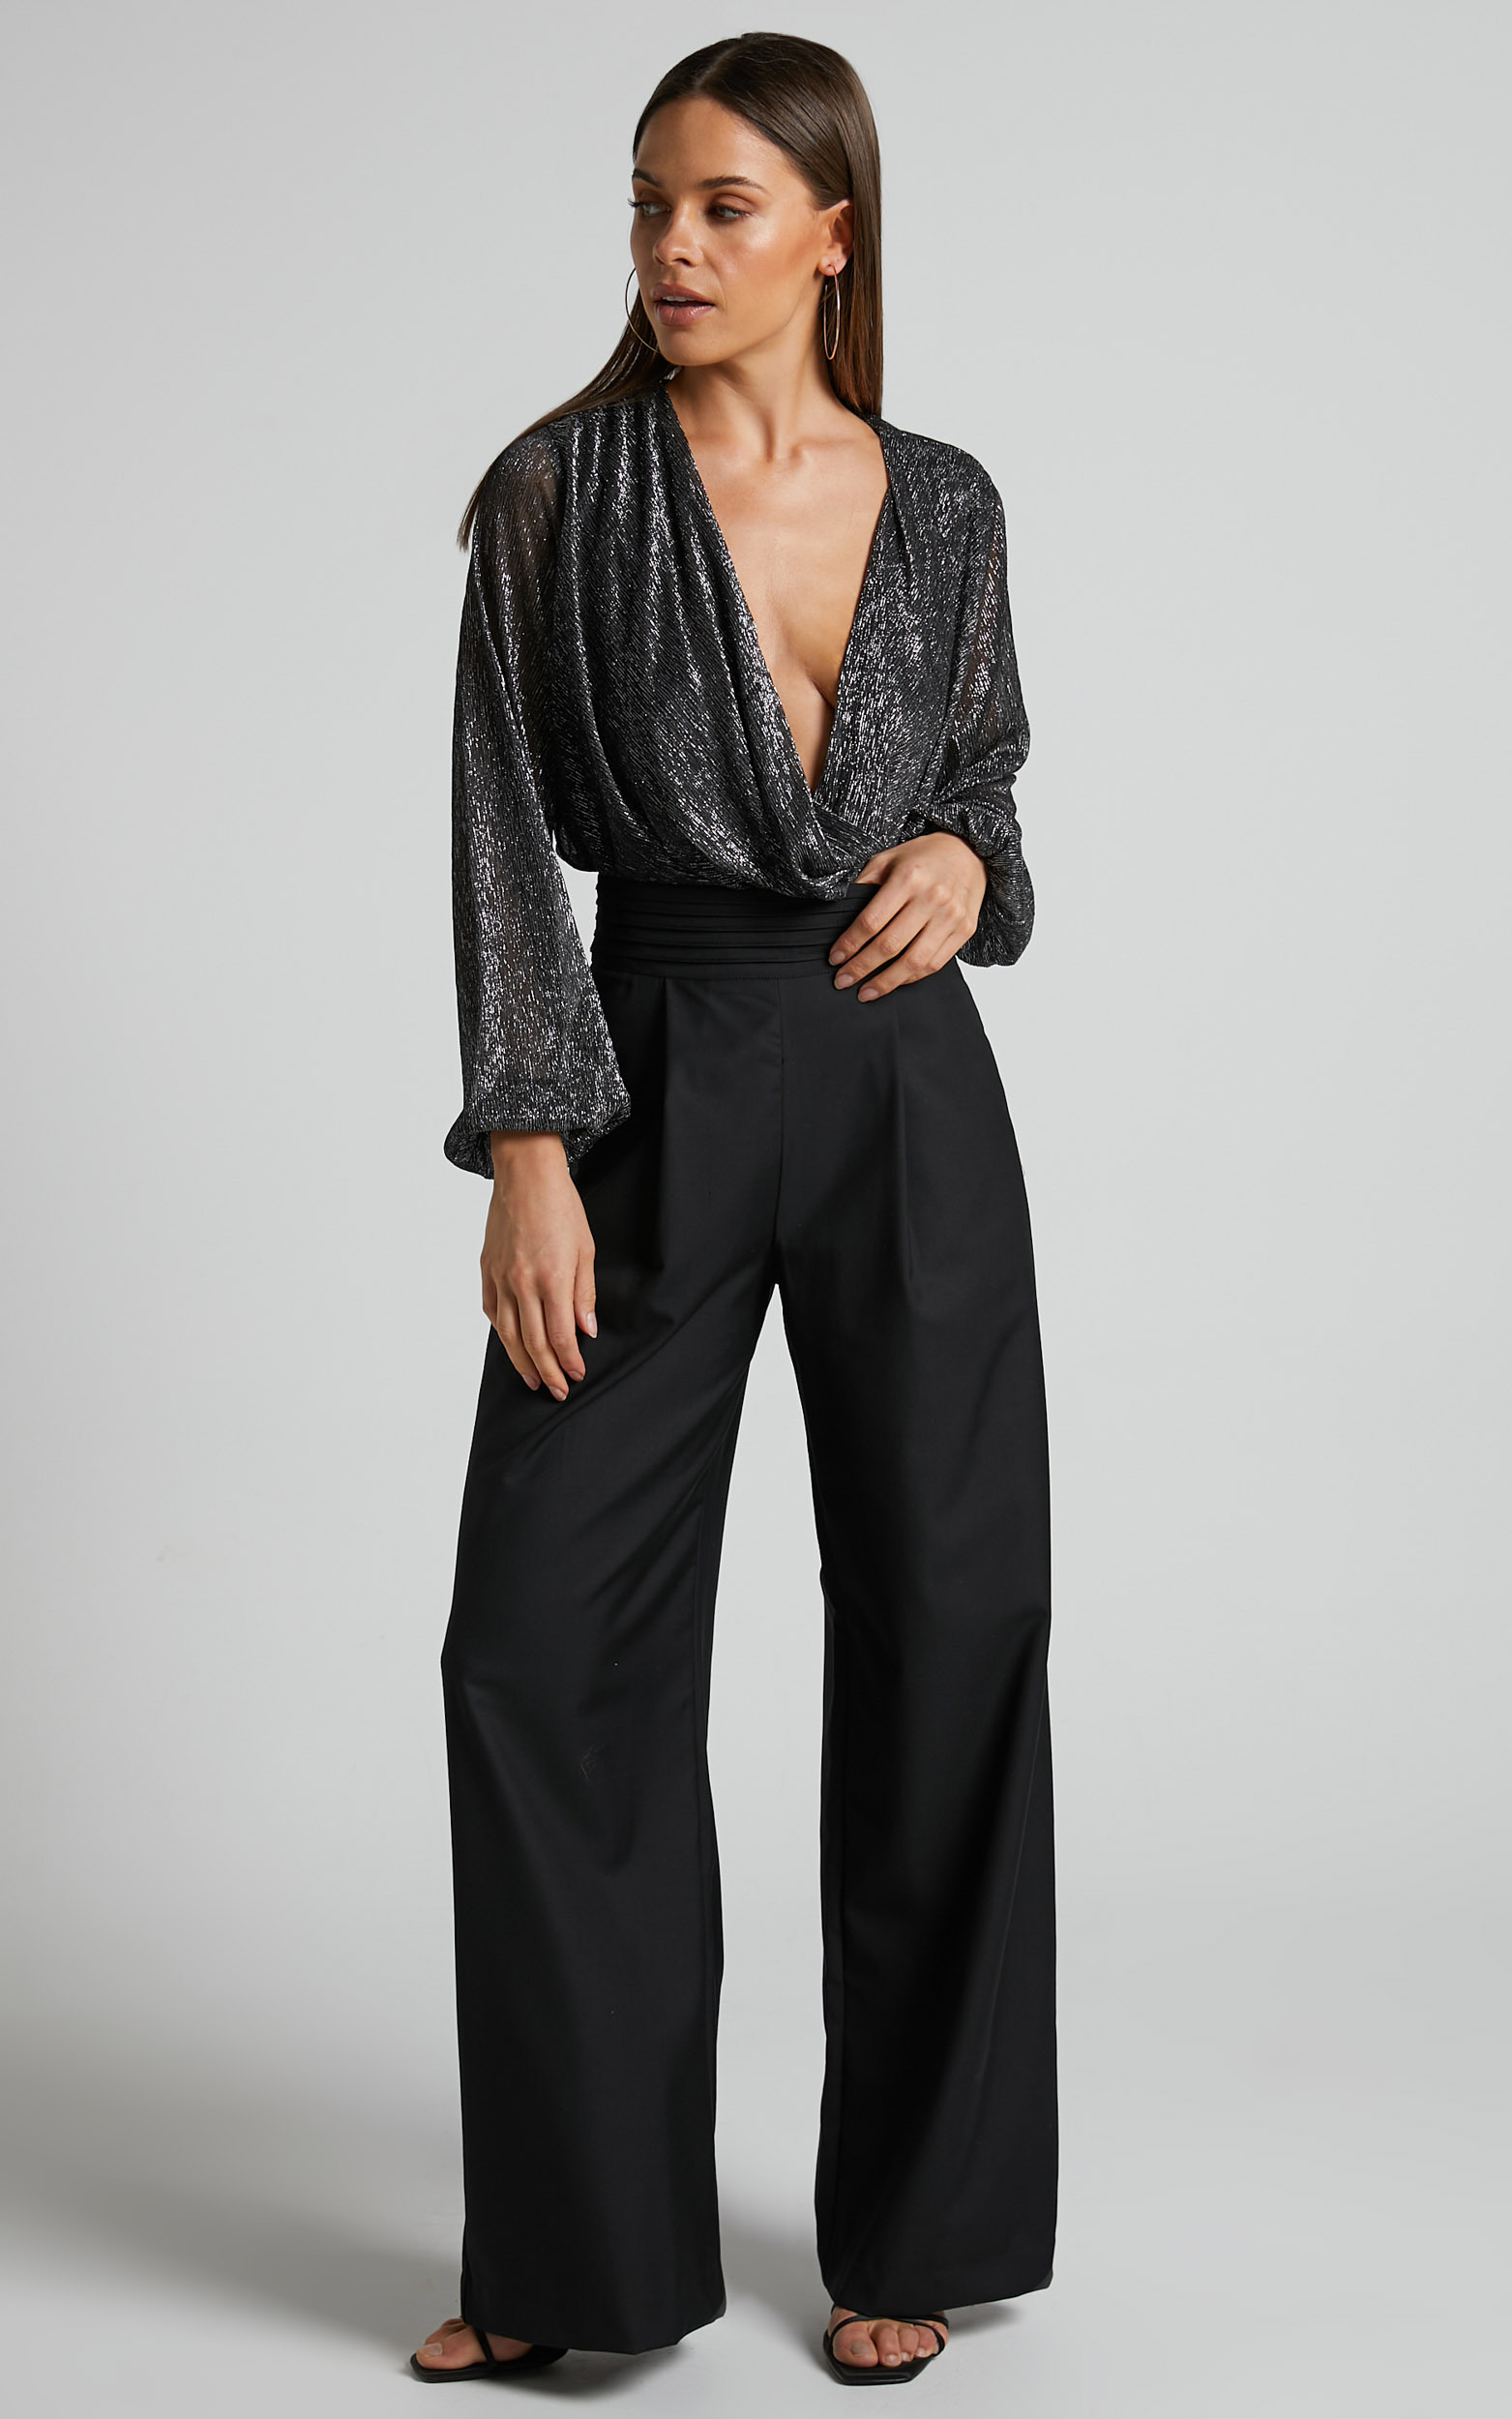 Hirna - High Waisted Pin Tuck Waist Detail Wide Leg Pants in Black - 04, BLK1, hi-res image number null